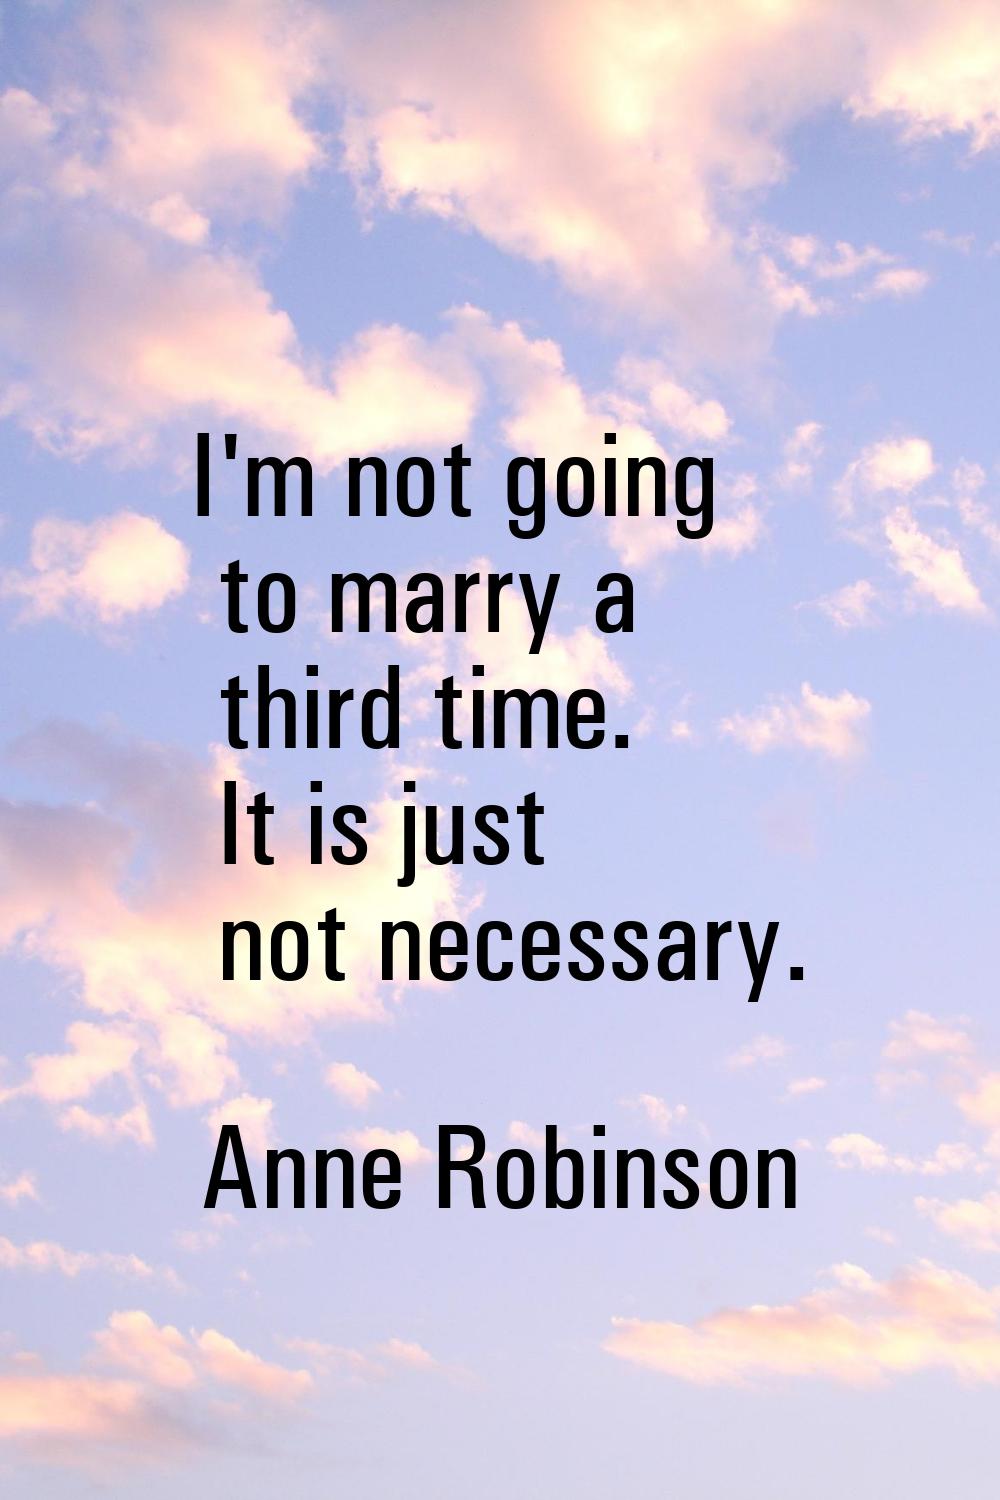 I'm not going to marry a third time. It is just not necessary.